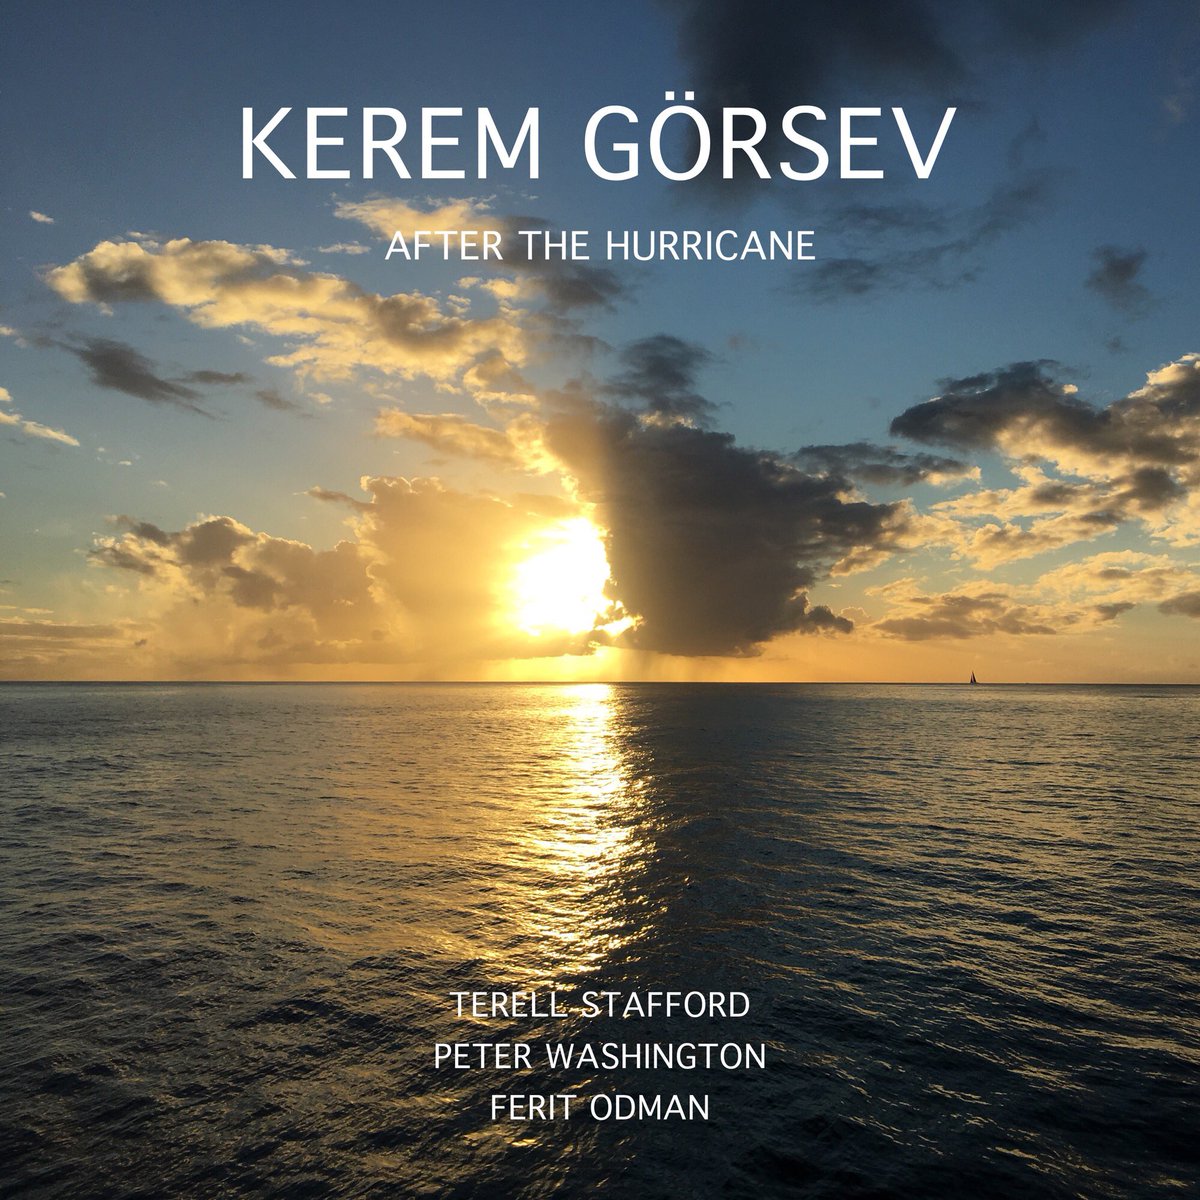 I had the pleasure of producing & also playing on @keremgorsev’s upcoming album that we recorded at @bunkerbrooklyn

🎺 @TerellStafford 
🎹 @keremgorsev 
🎸 #peterwashington
🥁 @feritodman 

Recorded & mixed by @aaronnevezie
 
Mastered by @emilylazarlodge at the @lodgemastering